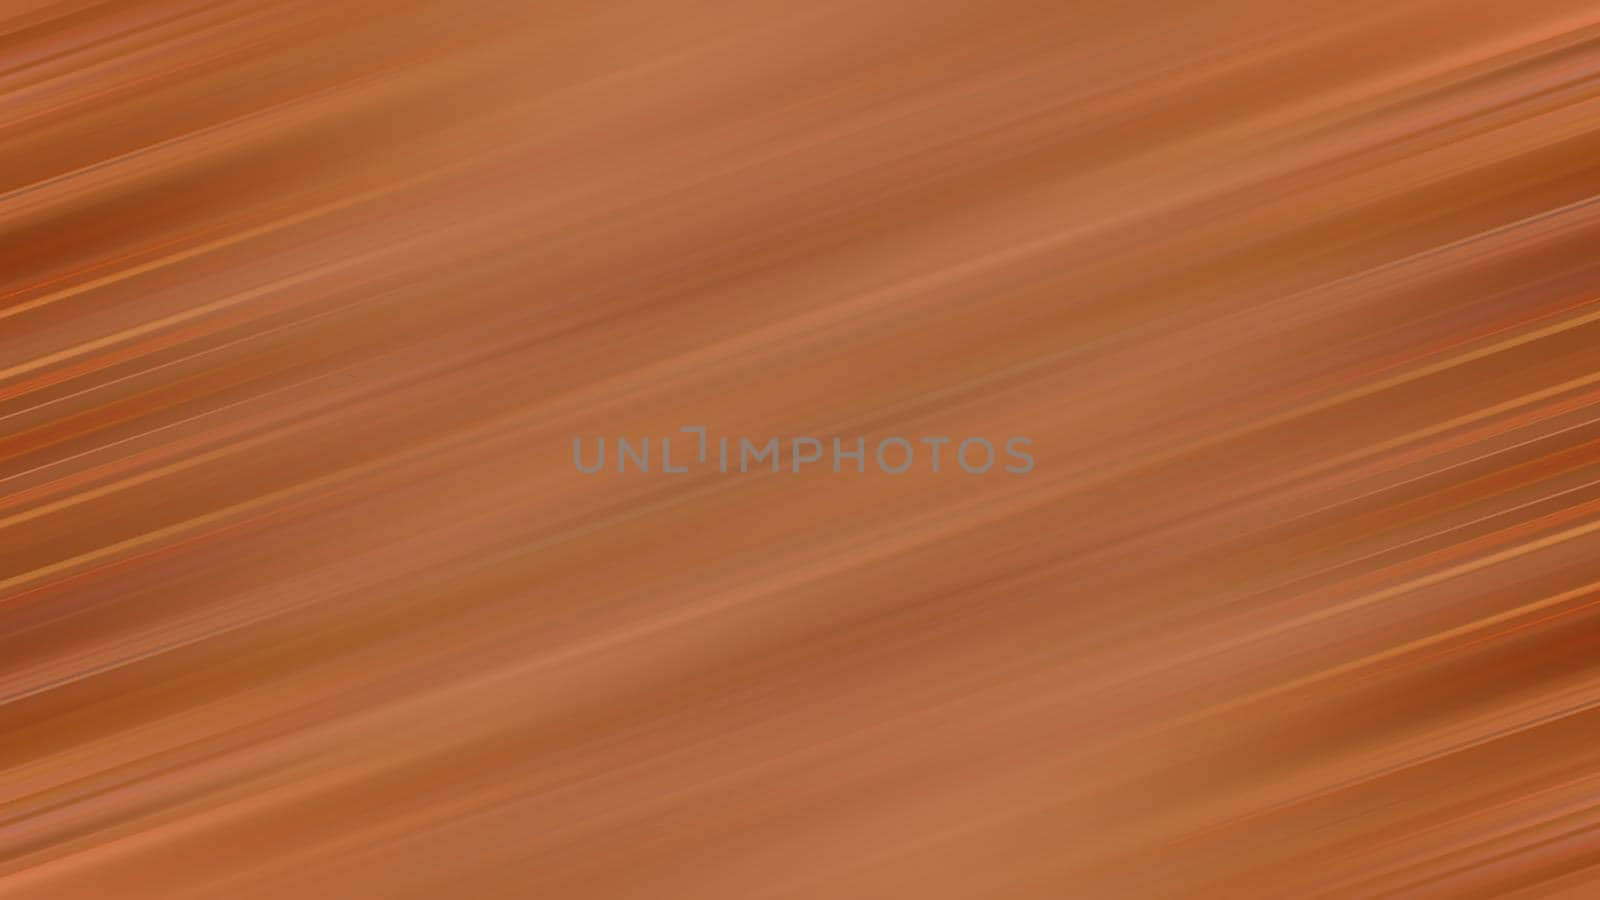 Abstract linear orange gradient background. Image and design.